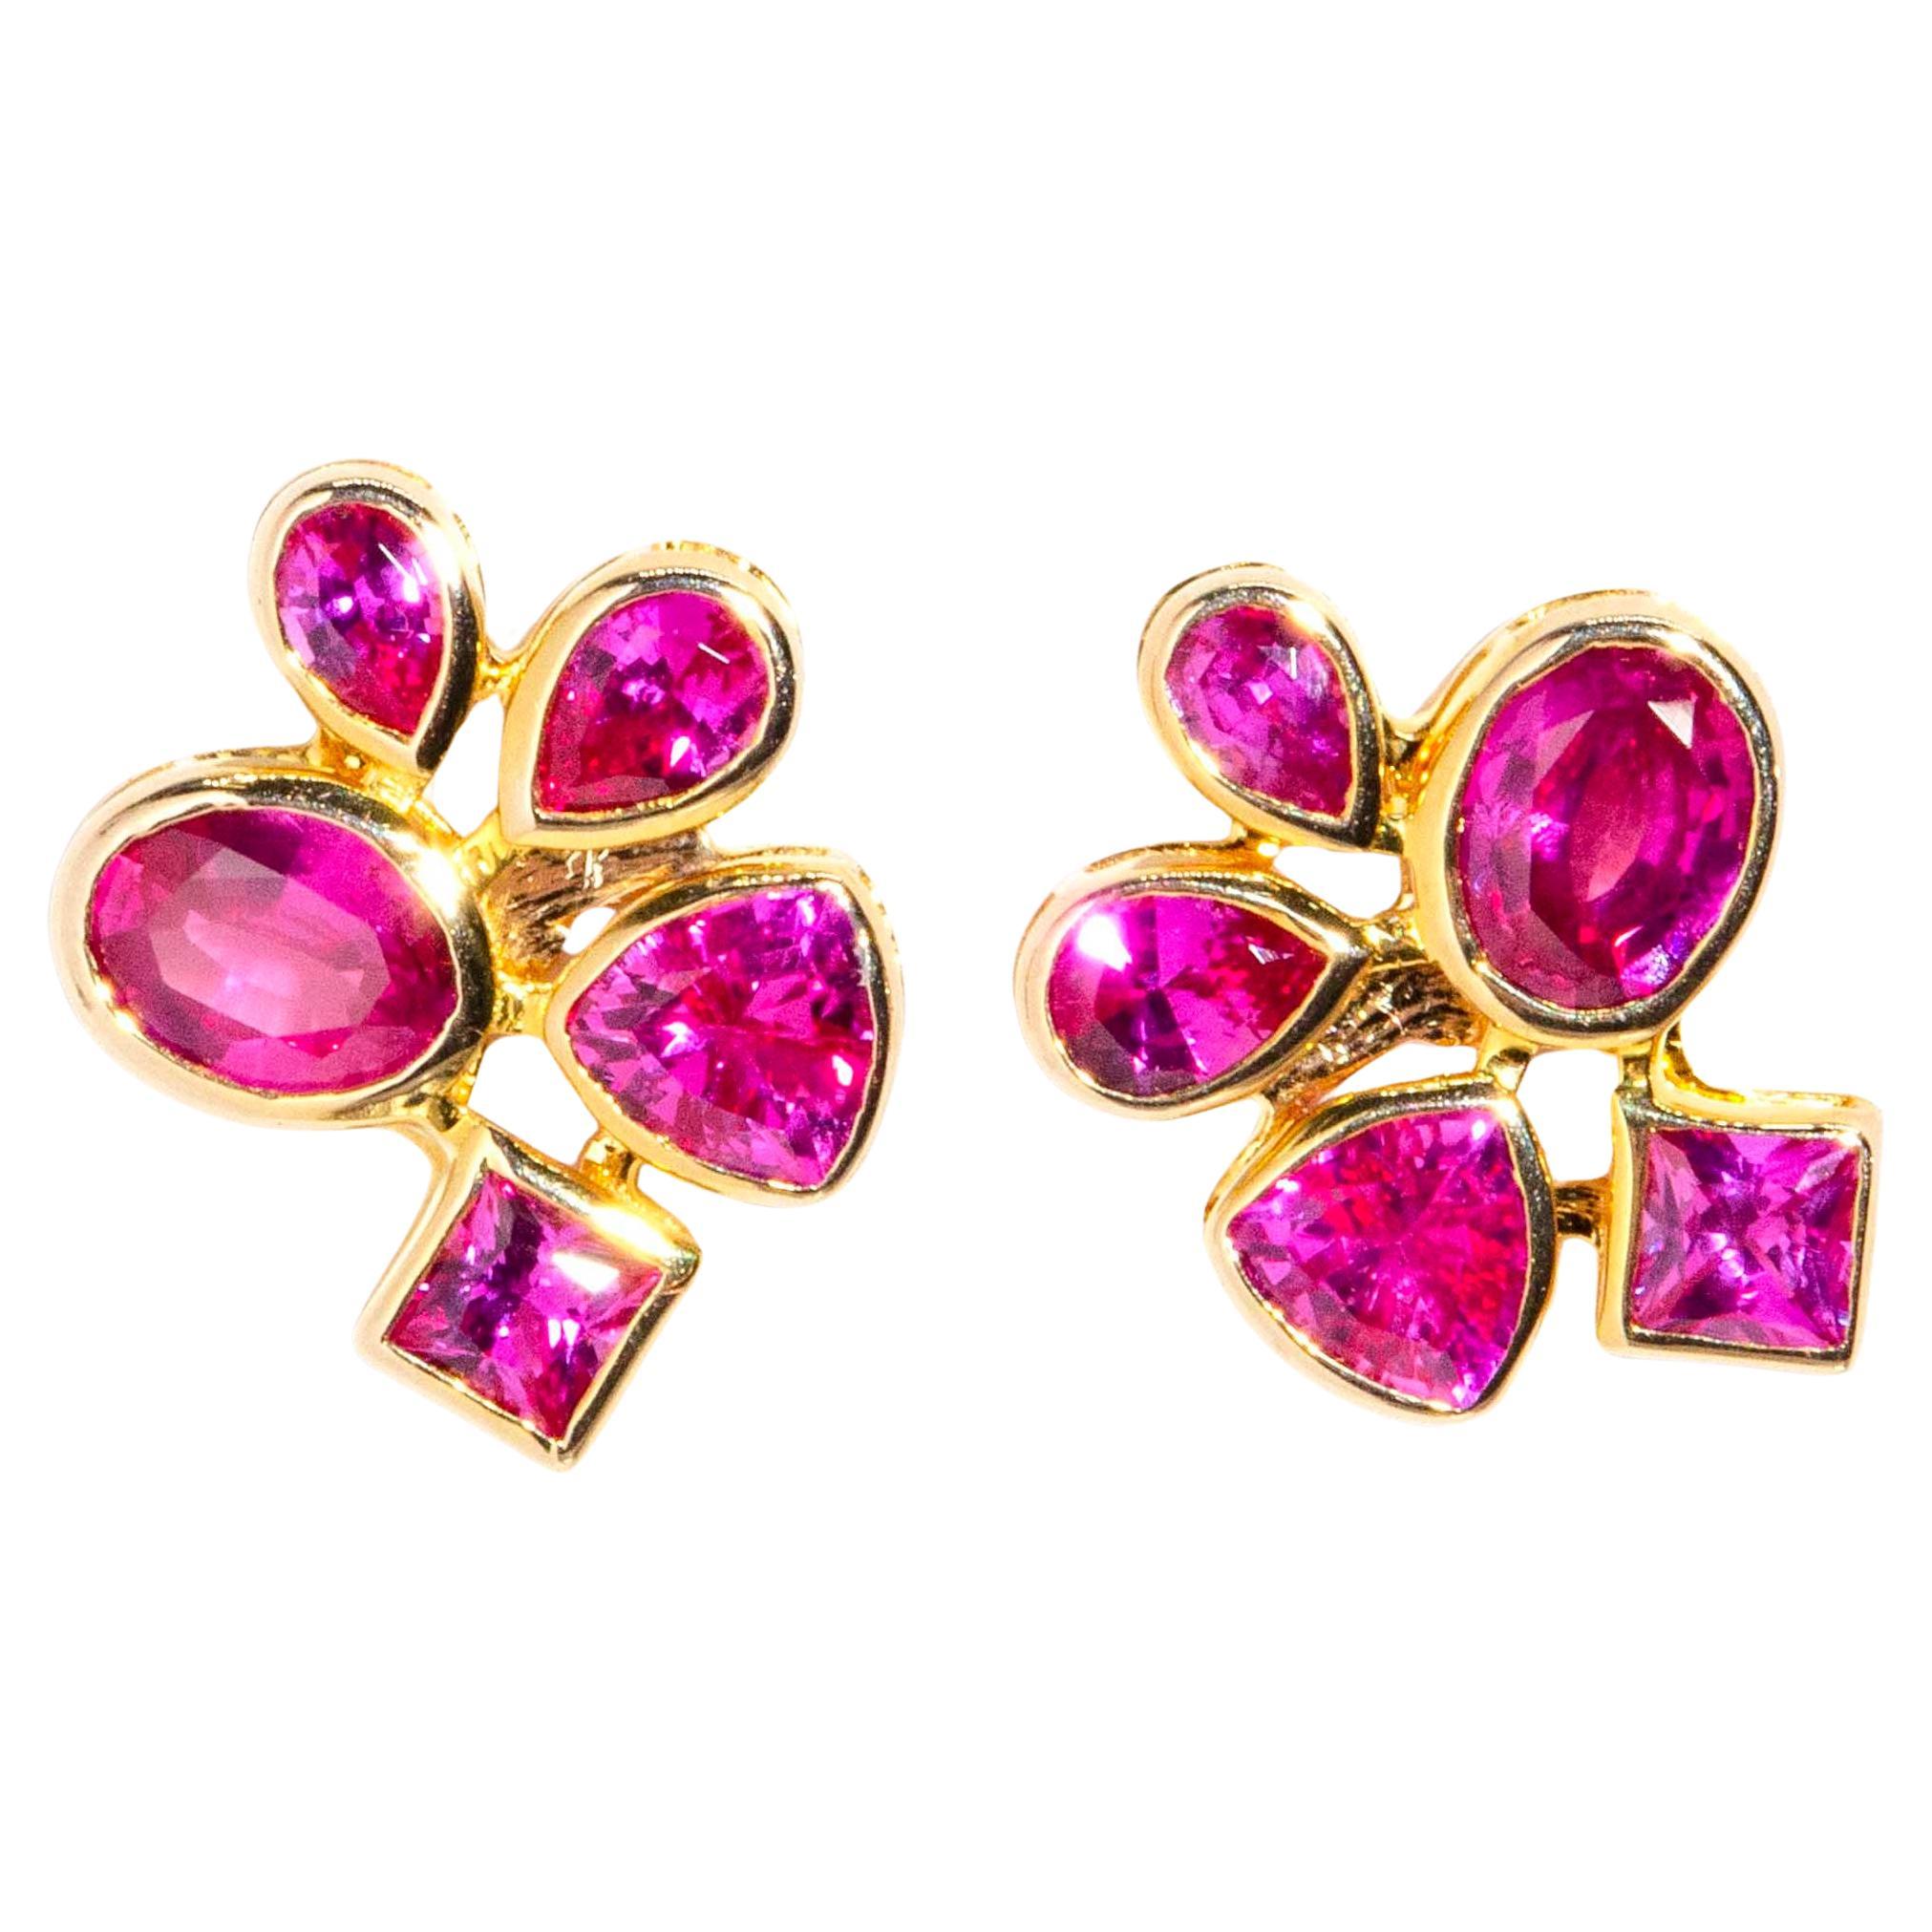 "Soul Colour" 1.80 Carat Vivid Red Ruby Stud Style Earrings 18 Carat Yellow Gold For Sale